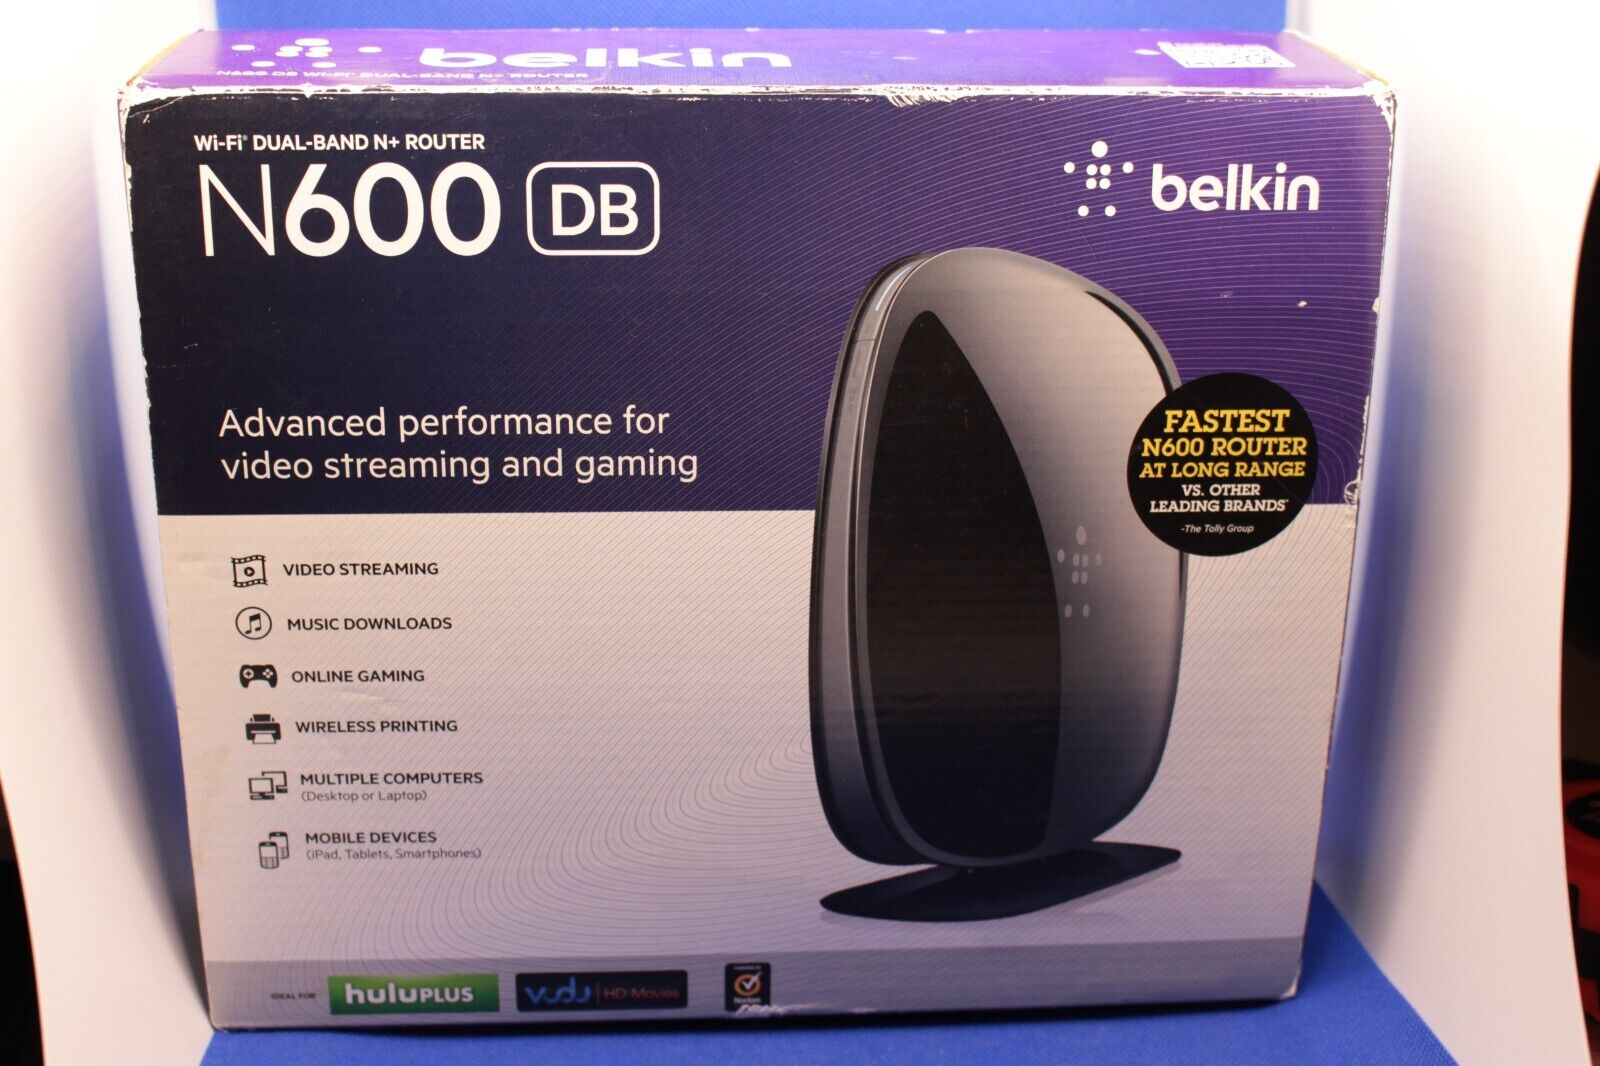 New Belkin N600 DB: Advanced Performance for Video Streaming